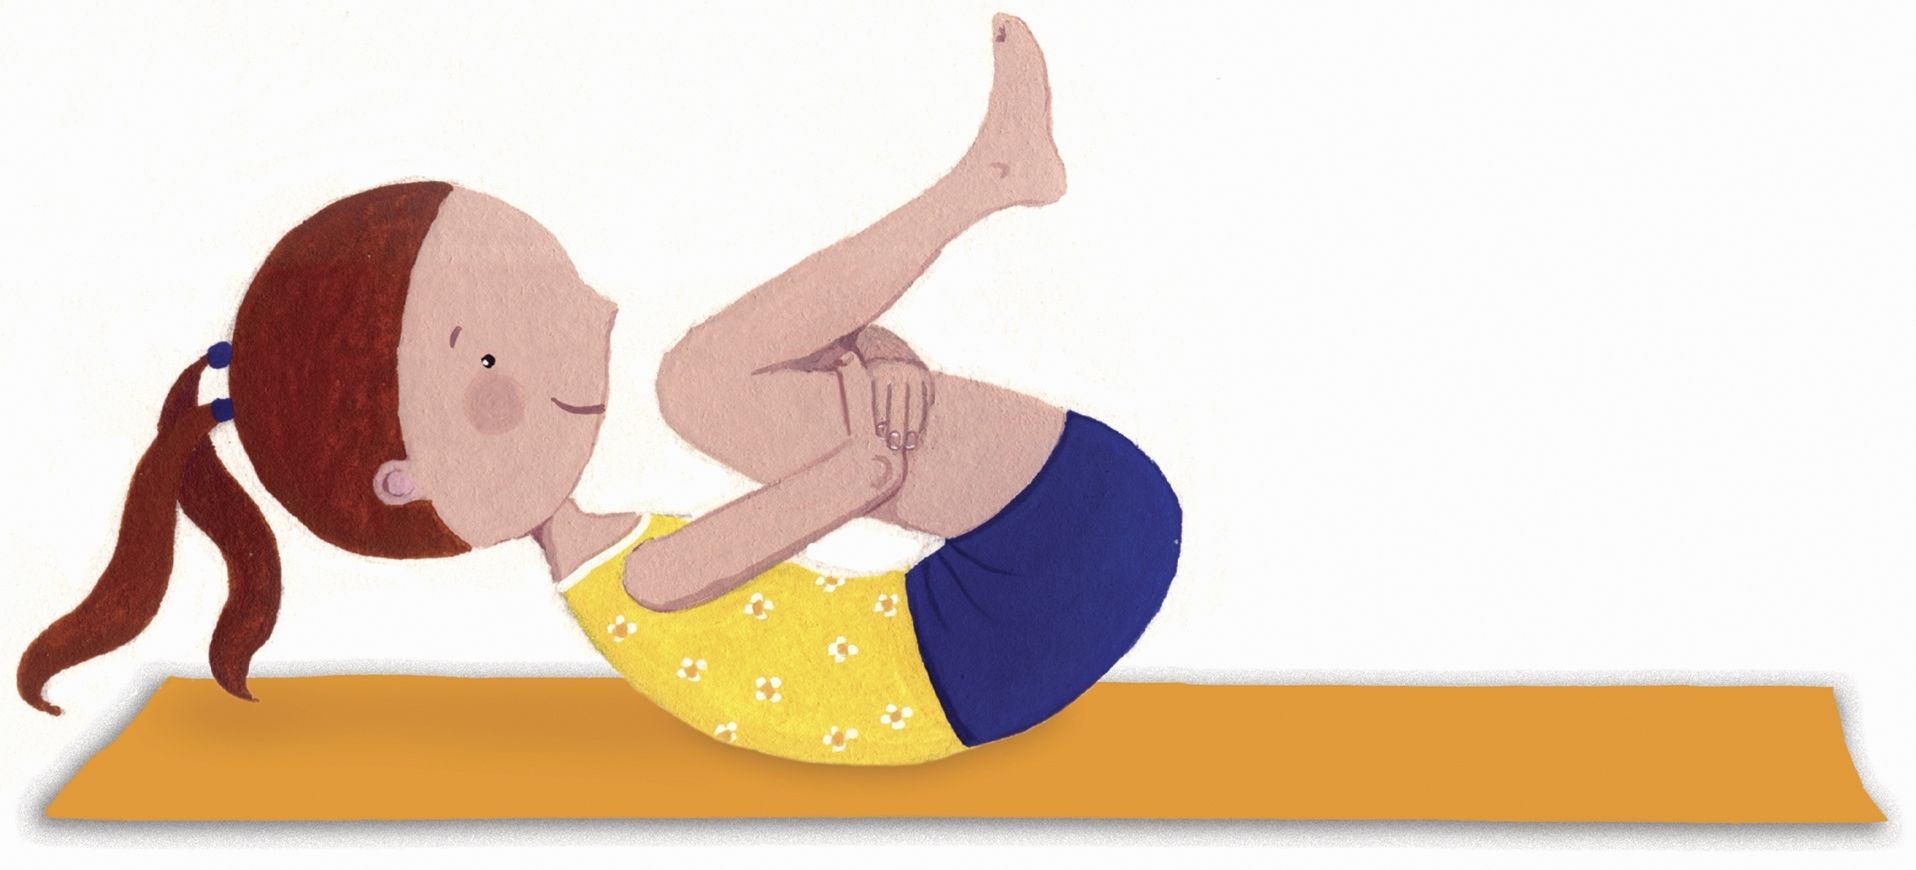 clipart images of yoga poses - photo #46